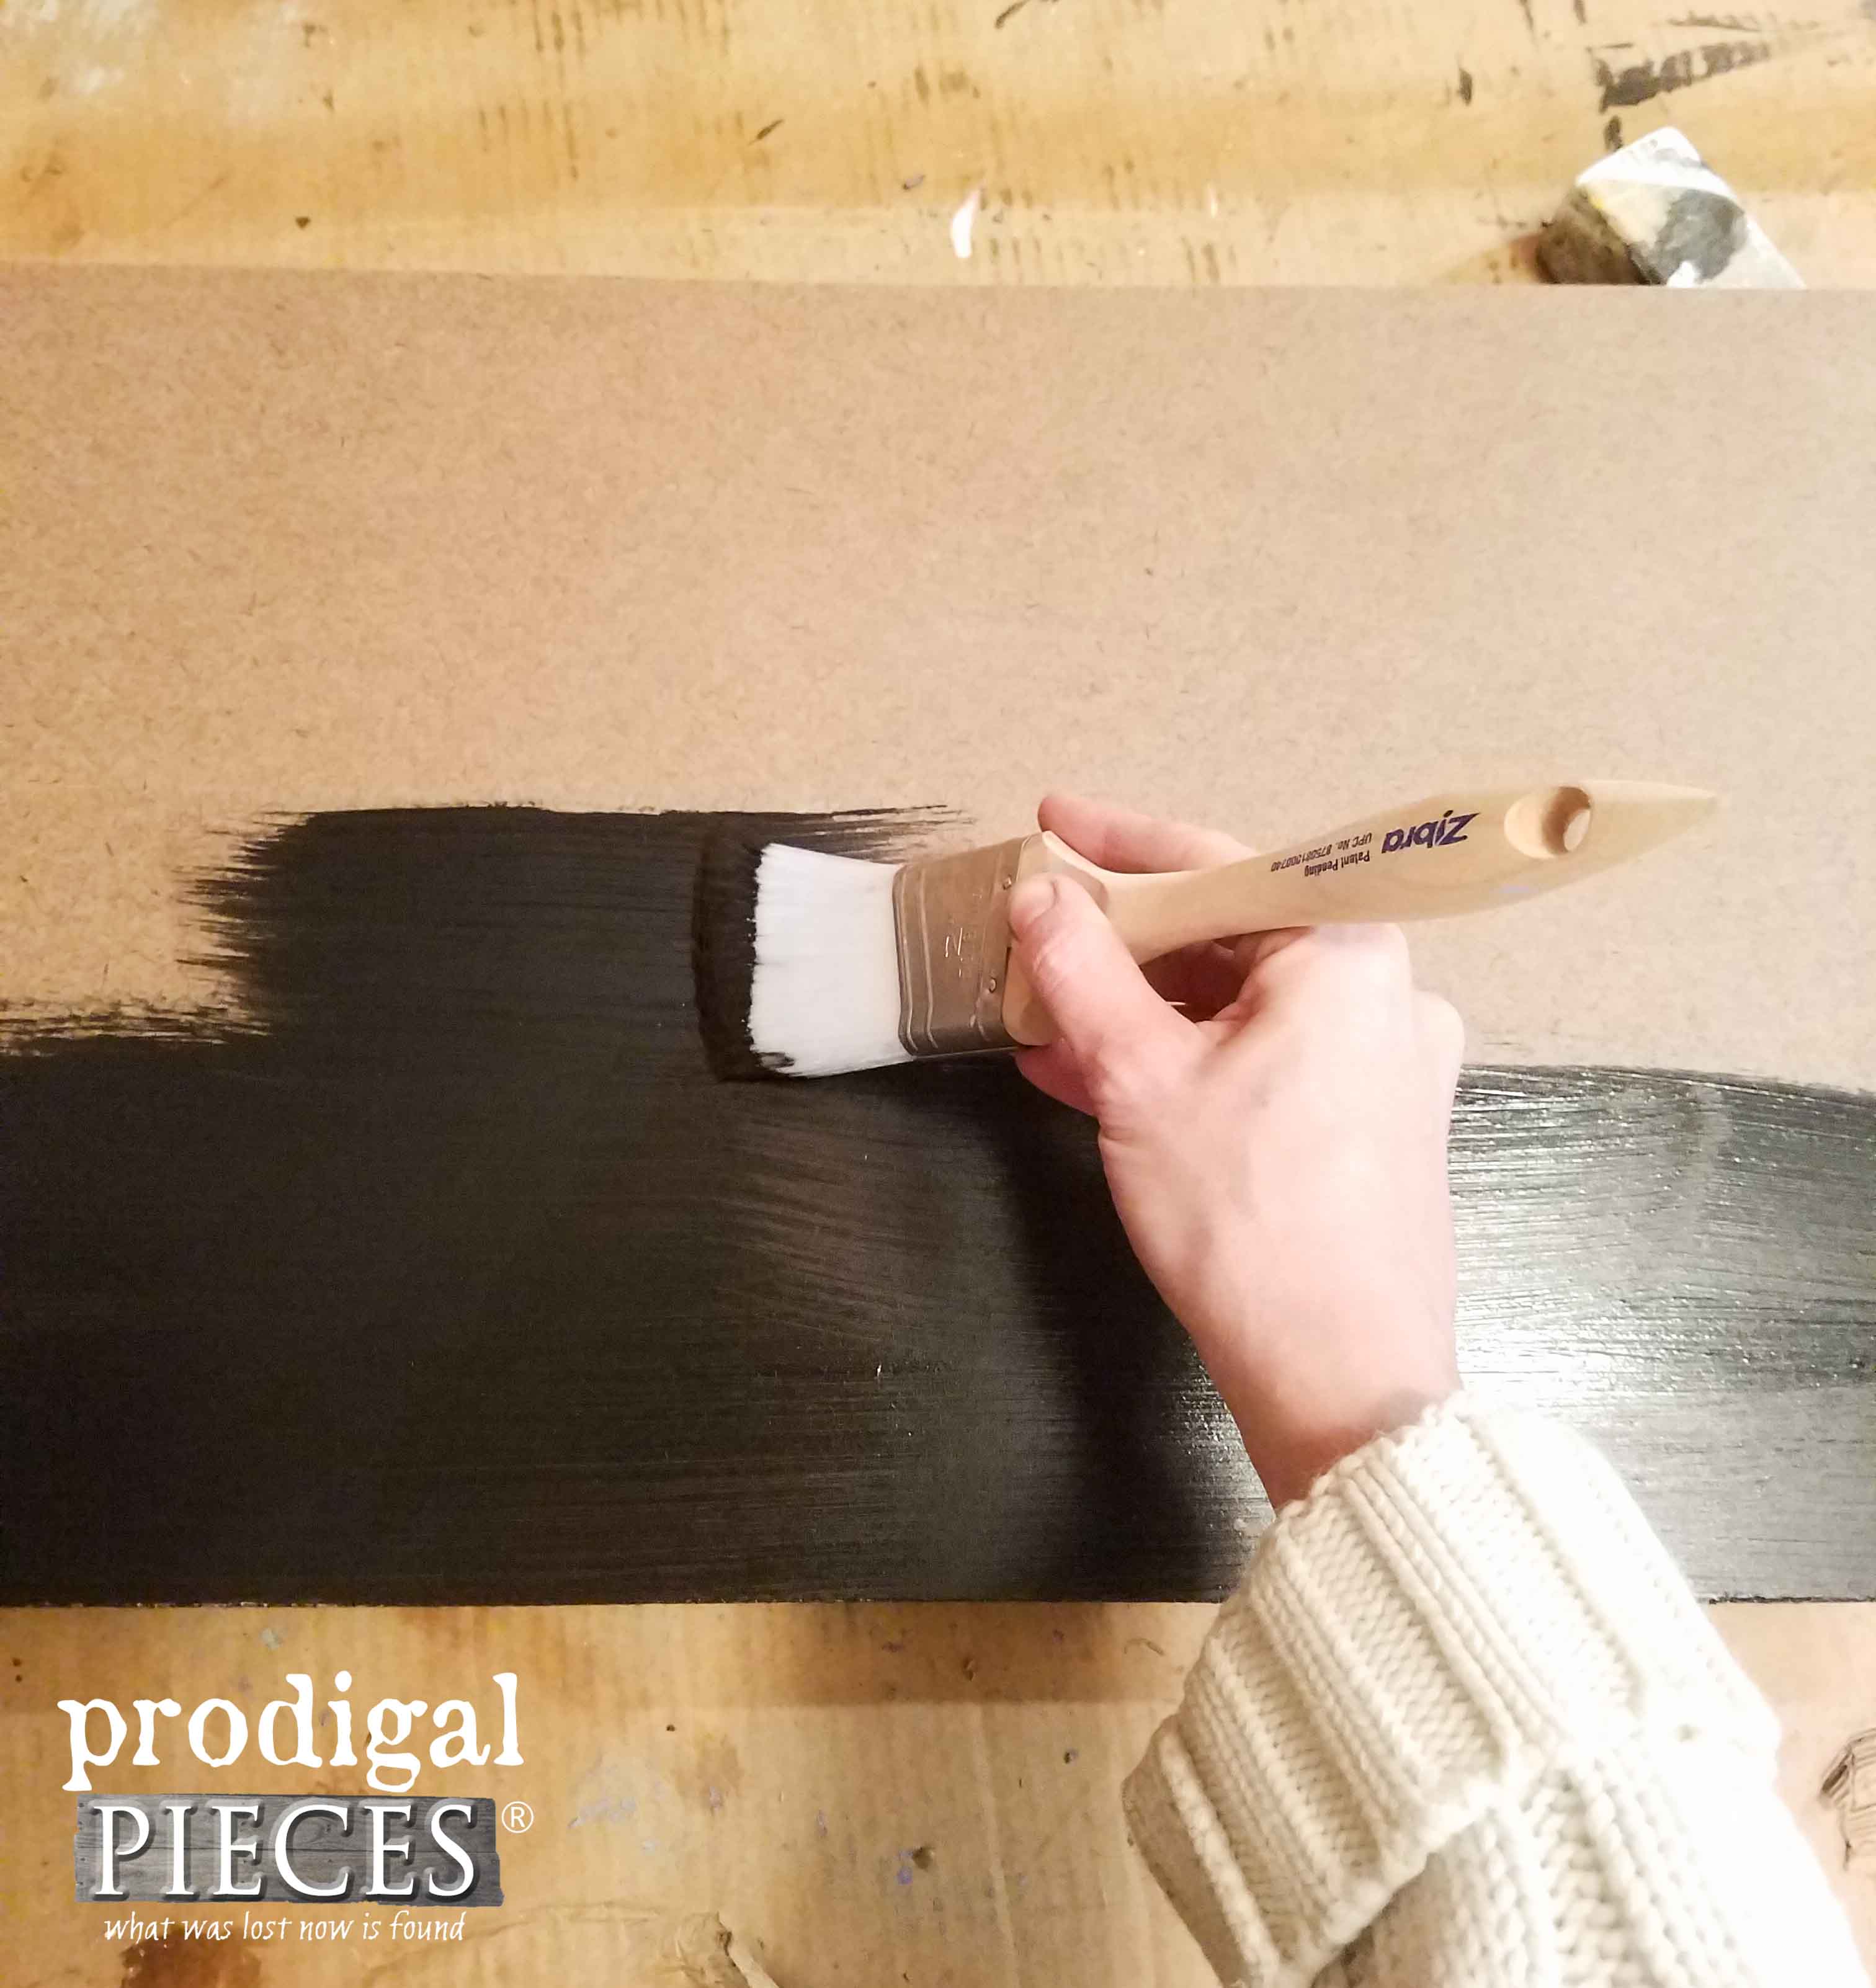 Painting Hardboard to Make DIY Chalkboard for Thrifty Farmhouse Decor | Prodigal Pieces | prodigalpieces.com